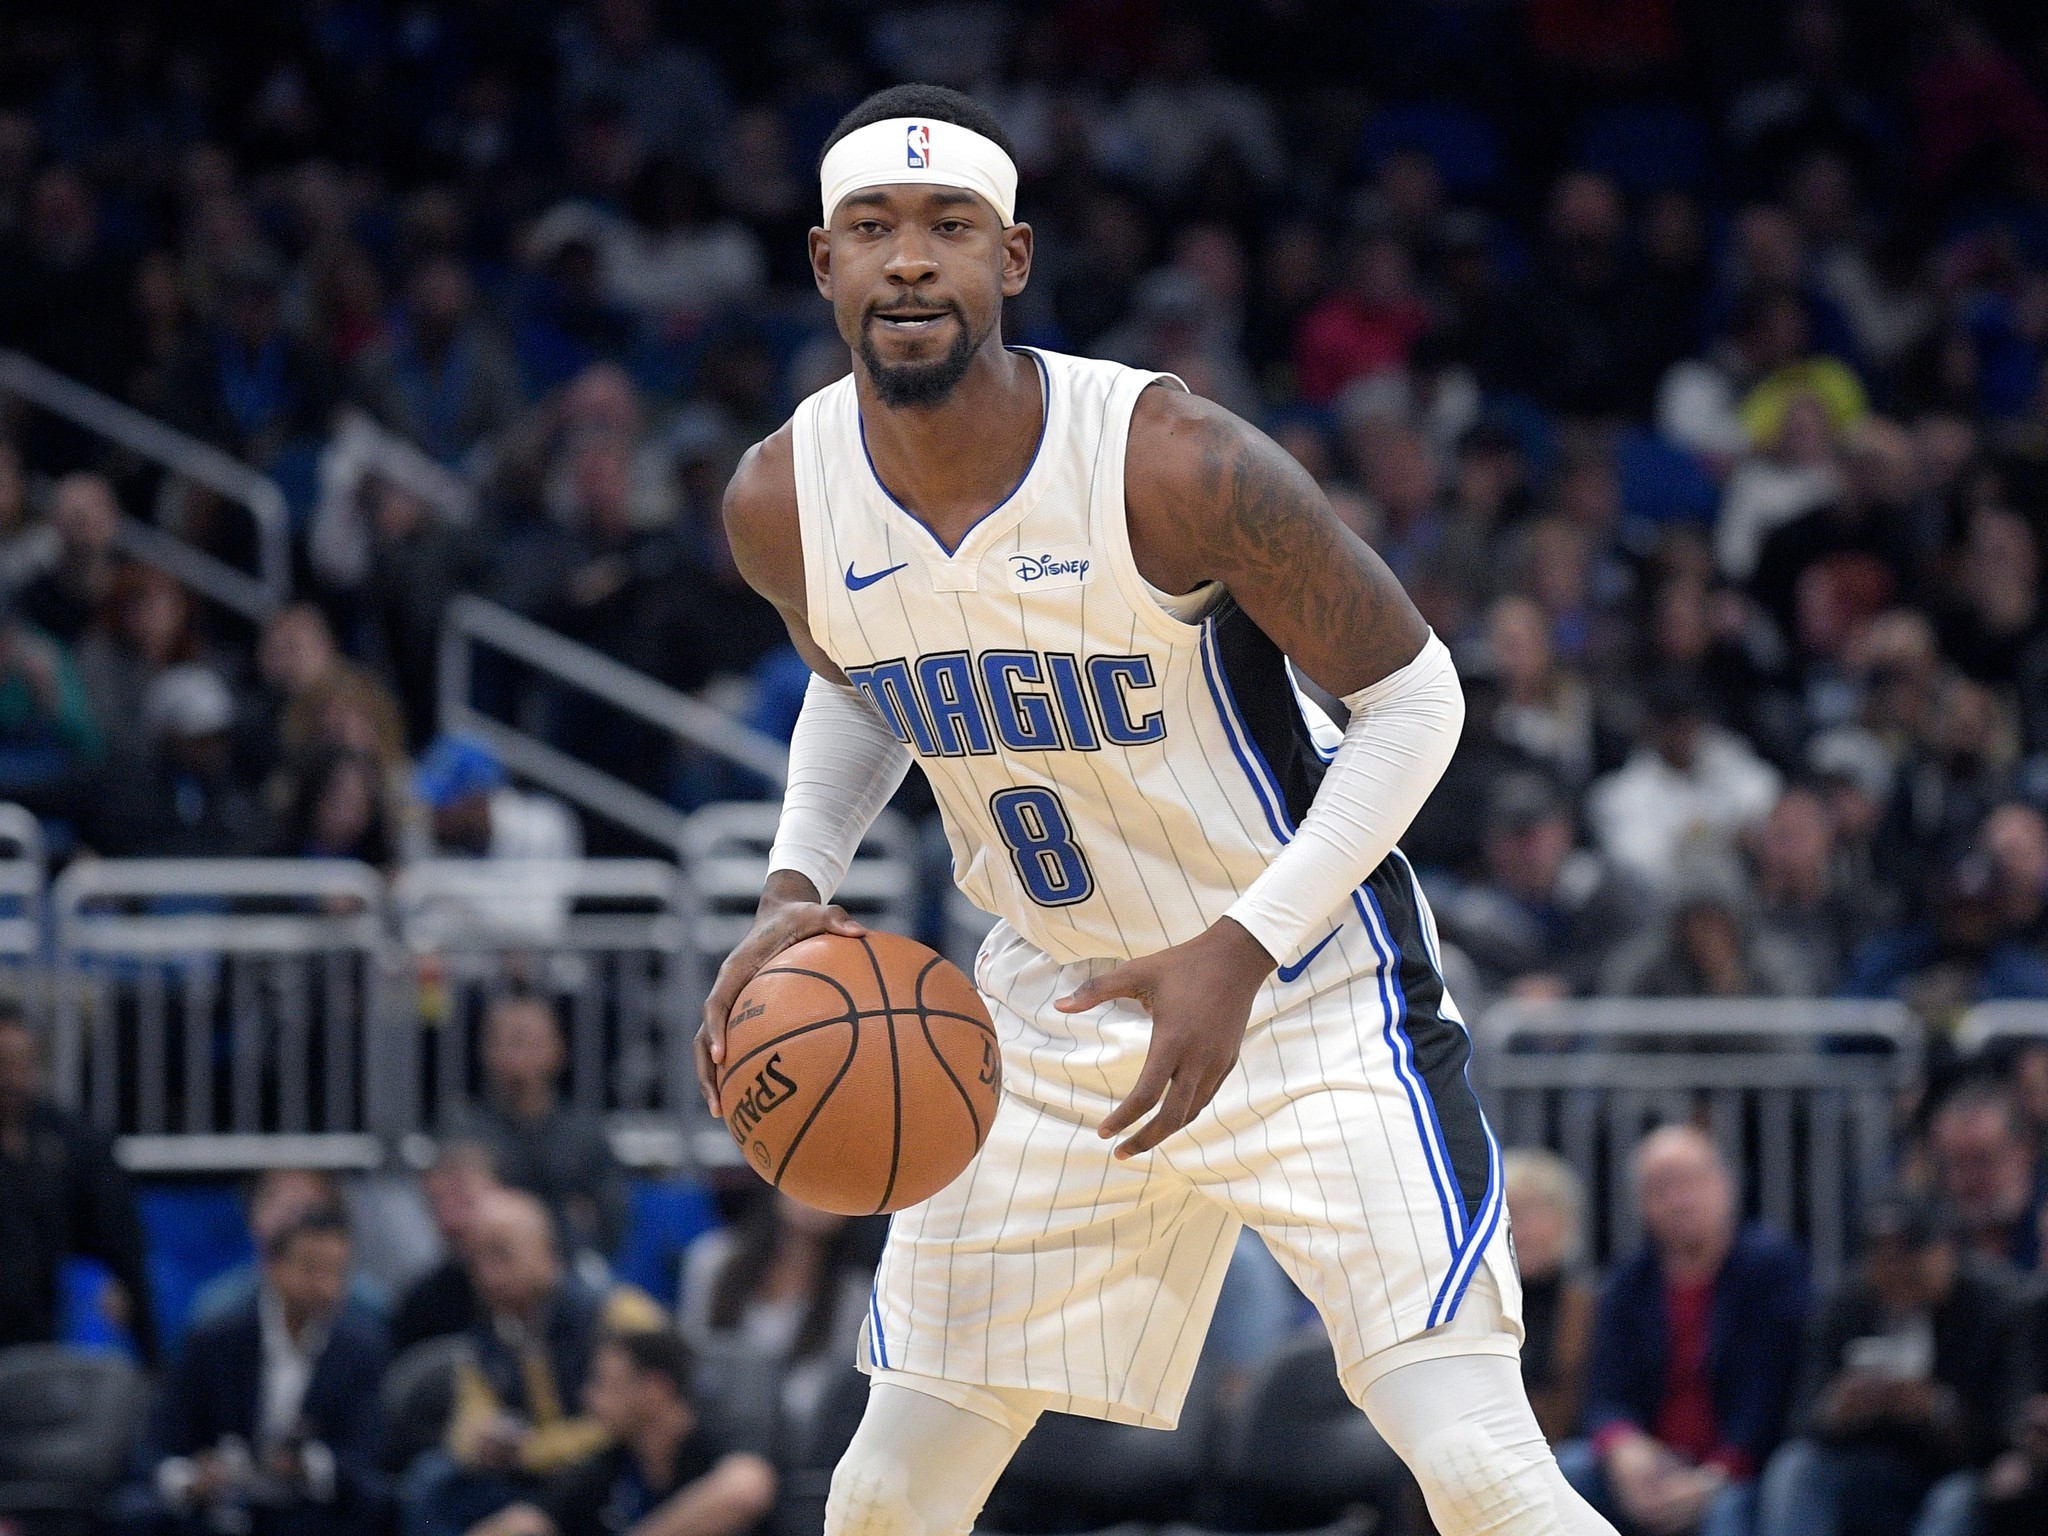 Magic guard Terrence Ross to change jersey number to honor Kobe Bryant